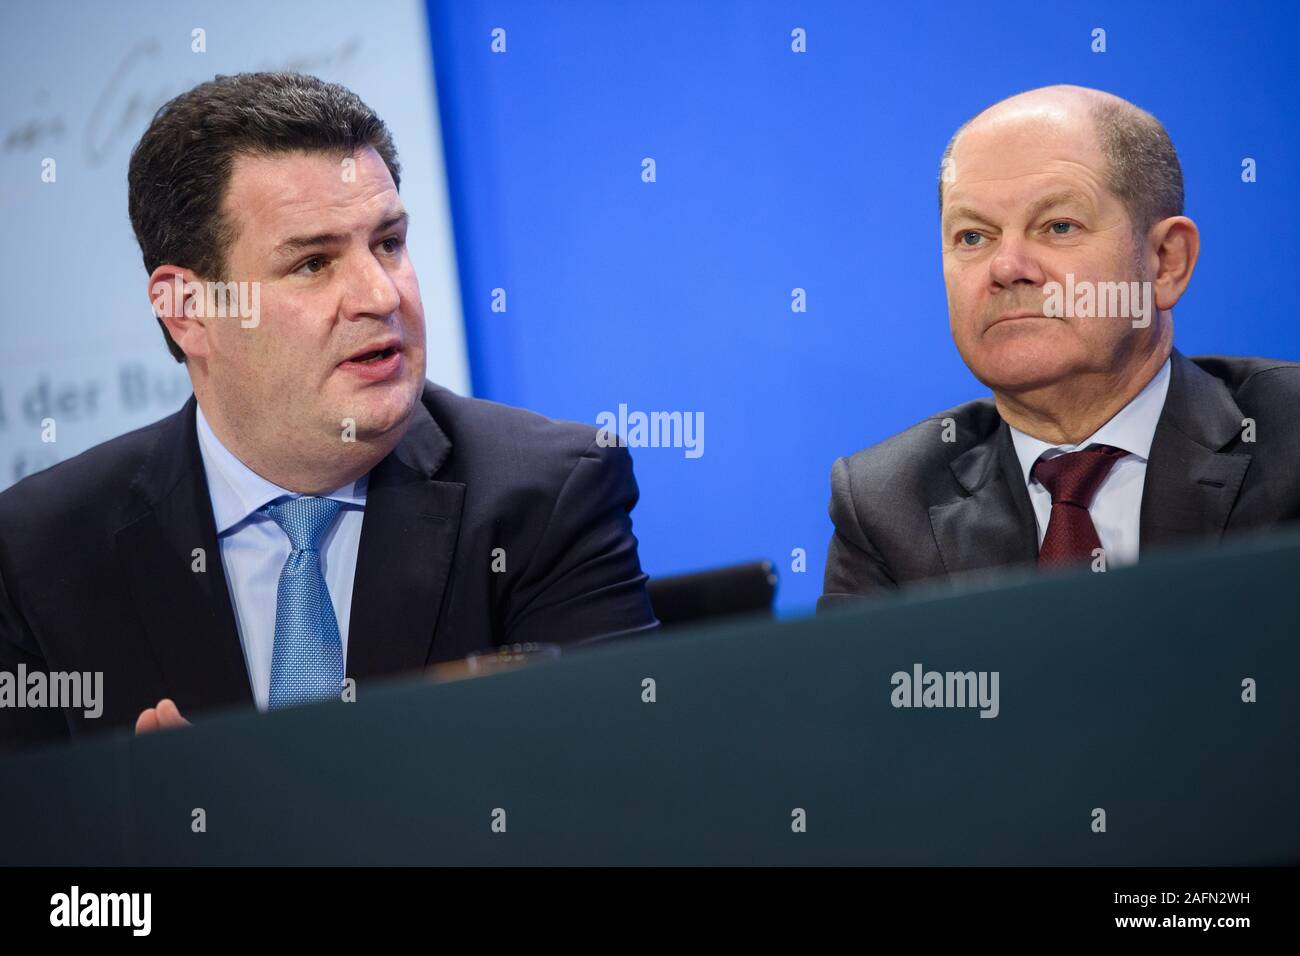 Berlin, Germany. 16th Dec, 2019. Hubertus Heil (SPD, l-r), Federal Minister of Labour and Social Affairs, and Olaf Scholz (SPD), Federal Minister of Finance, speak at a joint press conference with other government representatives at the Federal Chancellery after a summit to promote the recruitment of skilled labour from third countries. Credit: Gregor Fischer/dpa/Alamy Live News Stock Photo